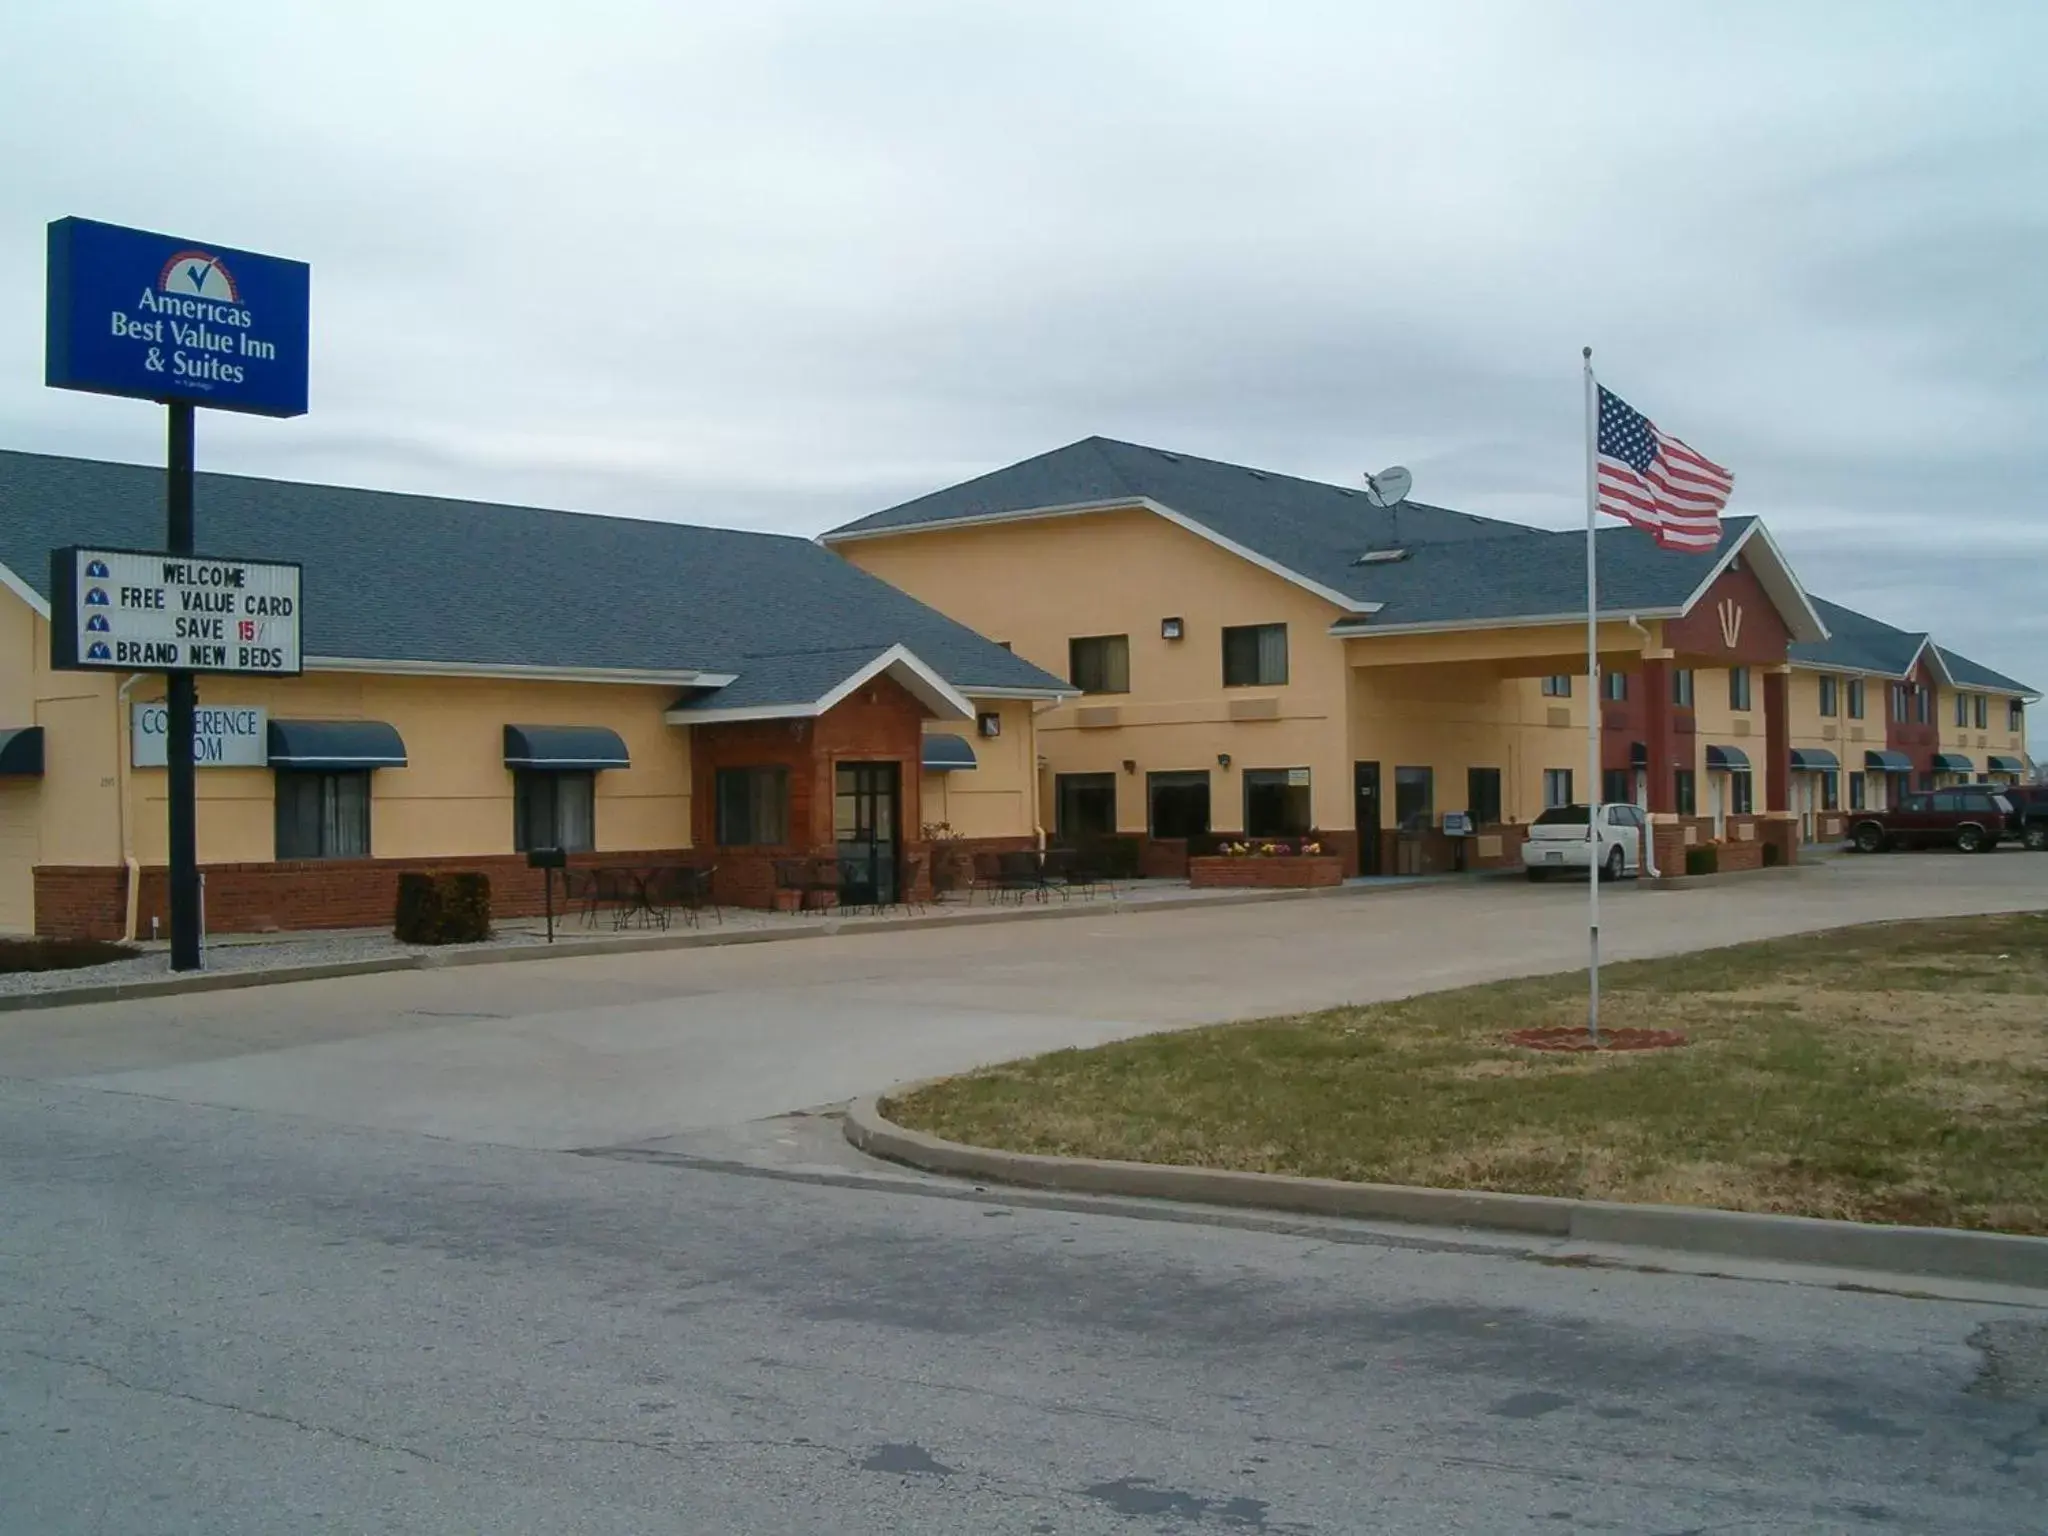 Property Building in Americas Best Value Inn and Suites - Nevada